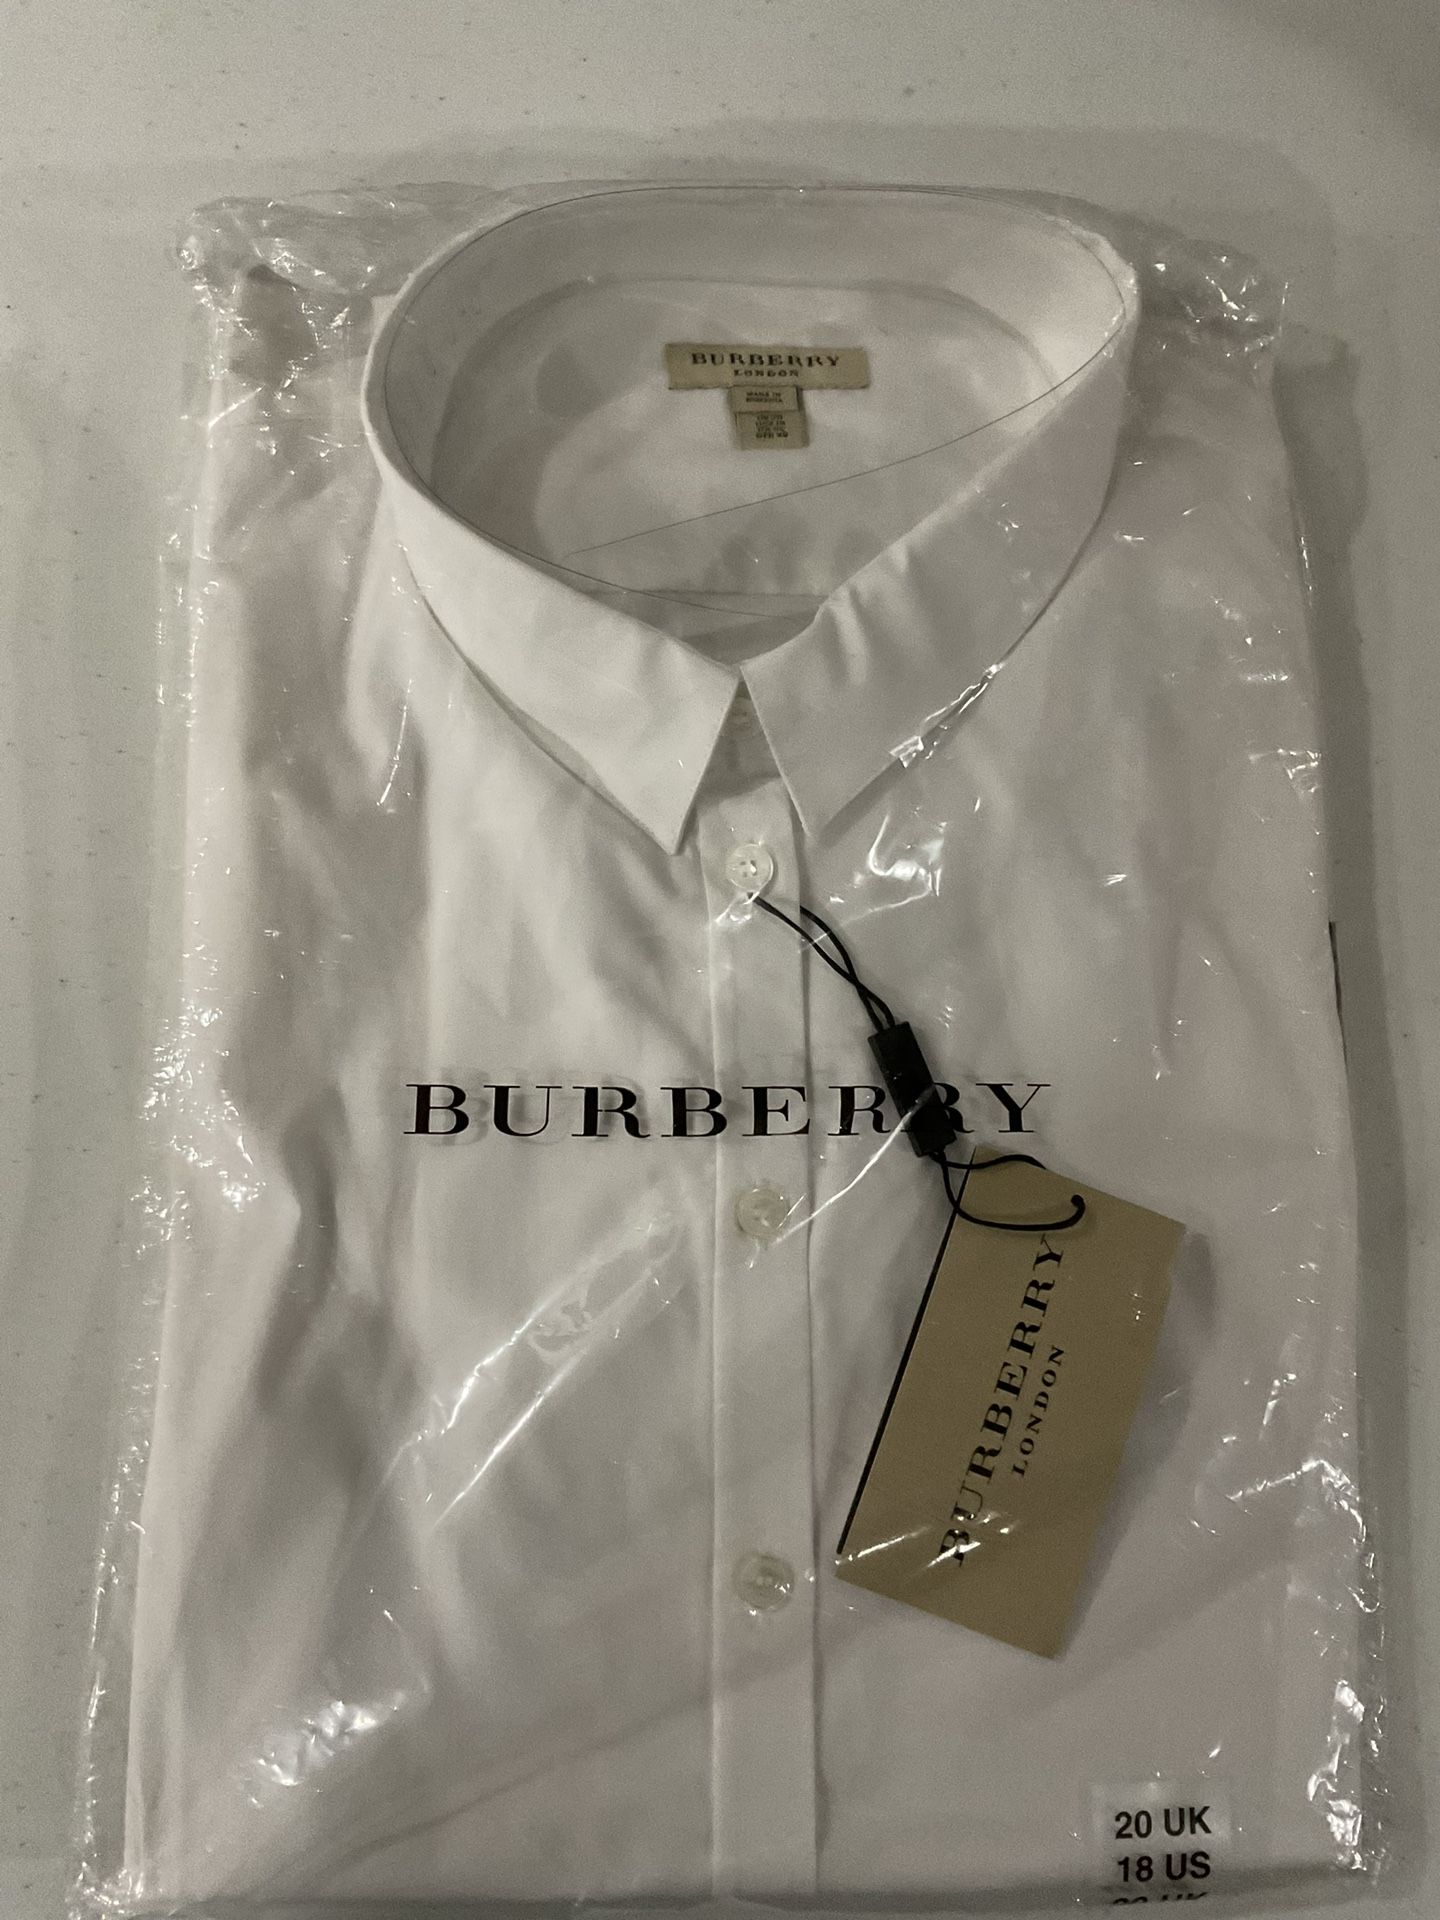 Authentic Burberry Brand New Women’s Button Down Shirt 